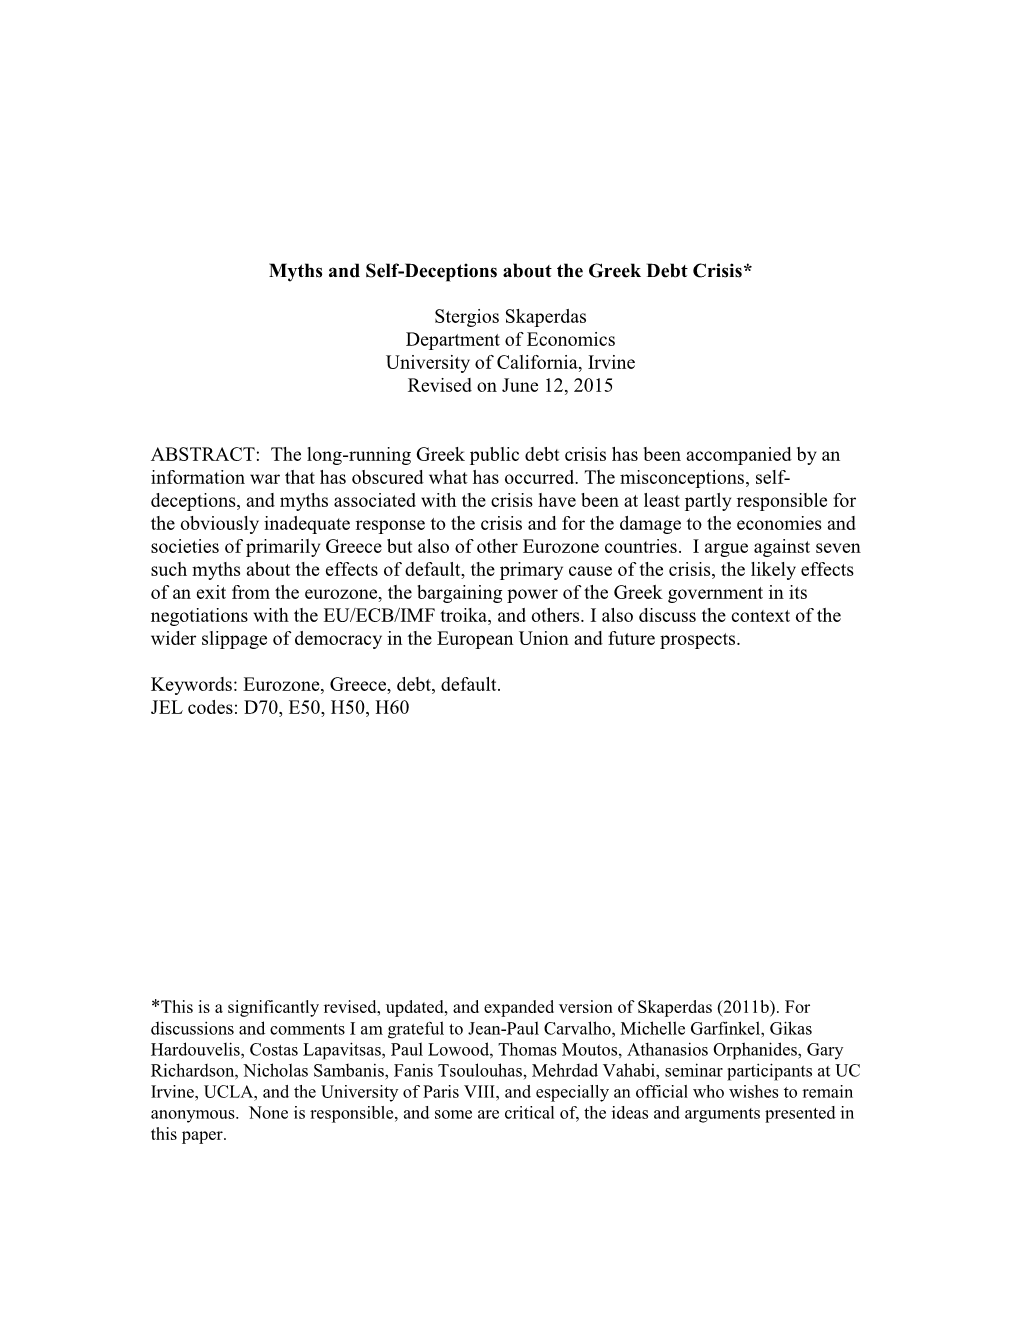 Seven Myths About the Greek Debt Crisis,” University of California, Irvine Working Paper, October